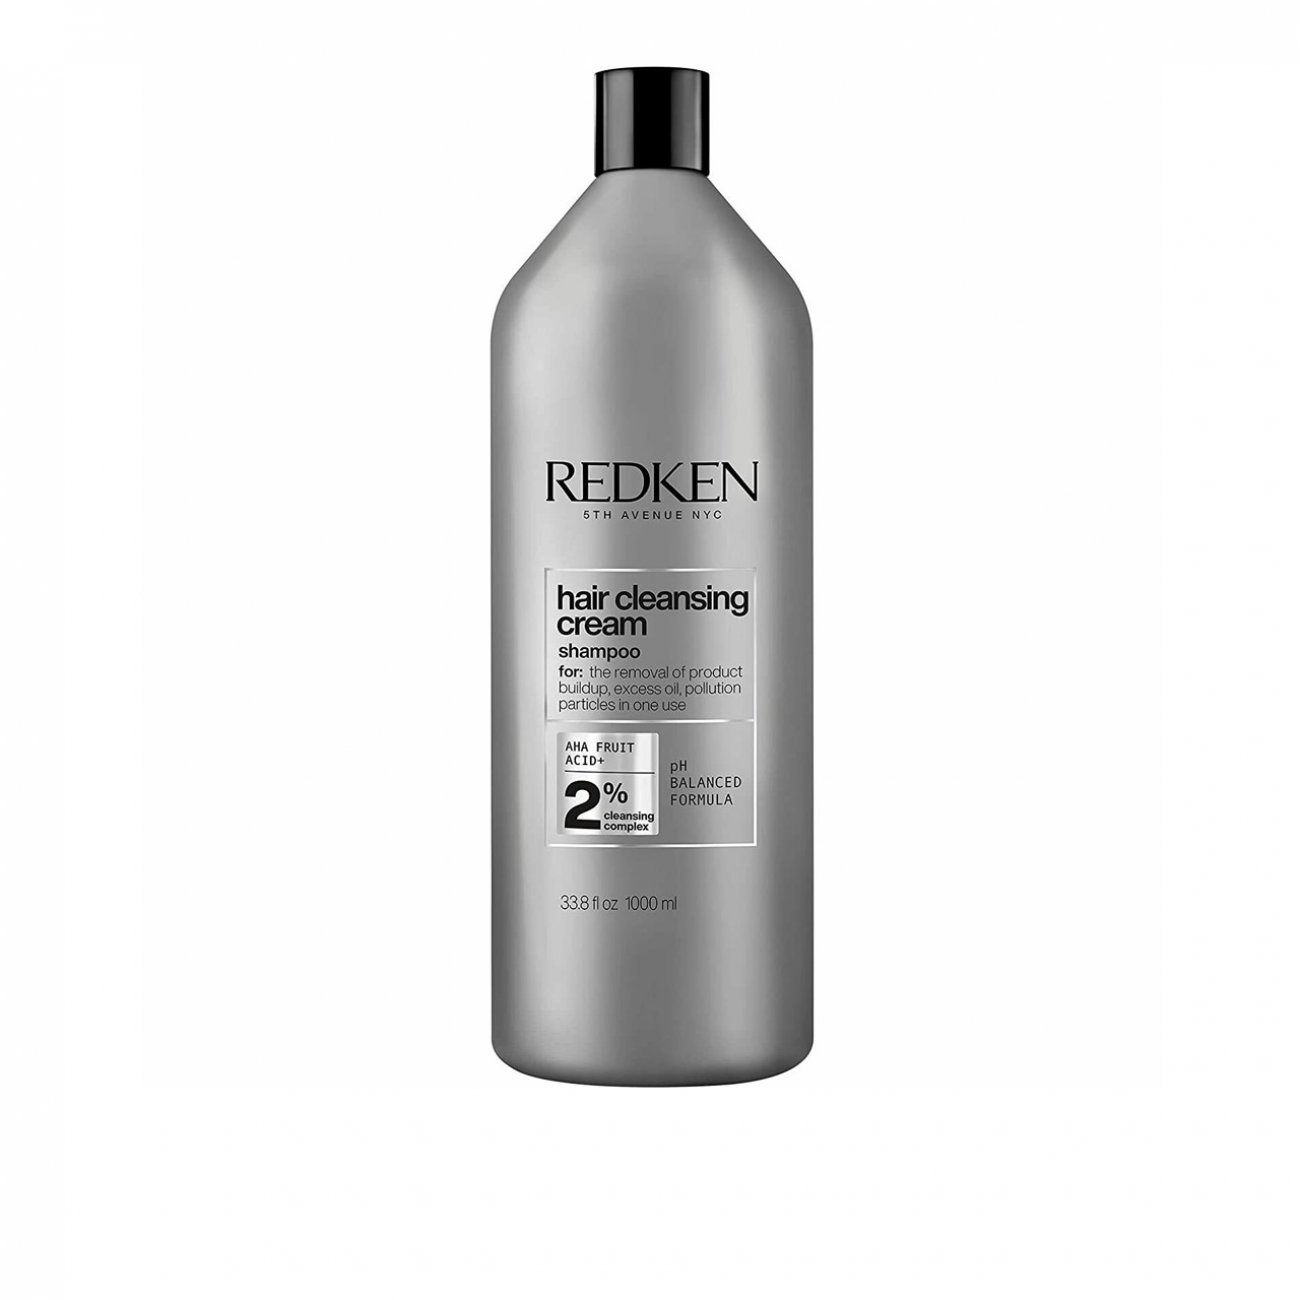 Redken Clean Maniac Hair Cleansing Cream Clarifying Shampoo  Kiss Product  Buildup Goodbye With These 12 Clarifying Shampoos  POPSUGAR Beauty Photo 3